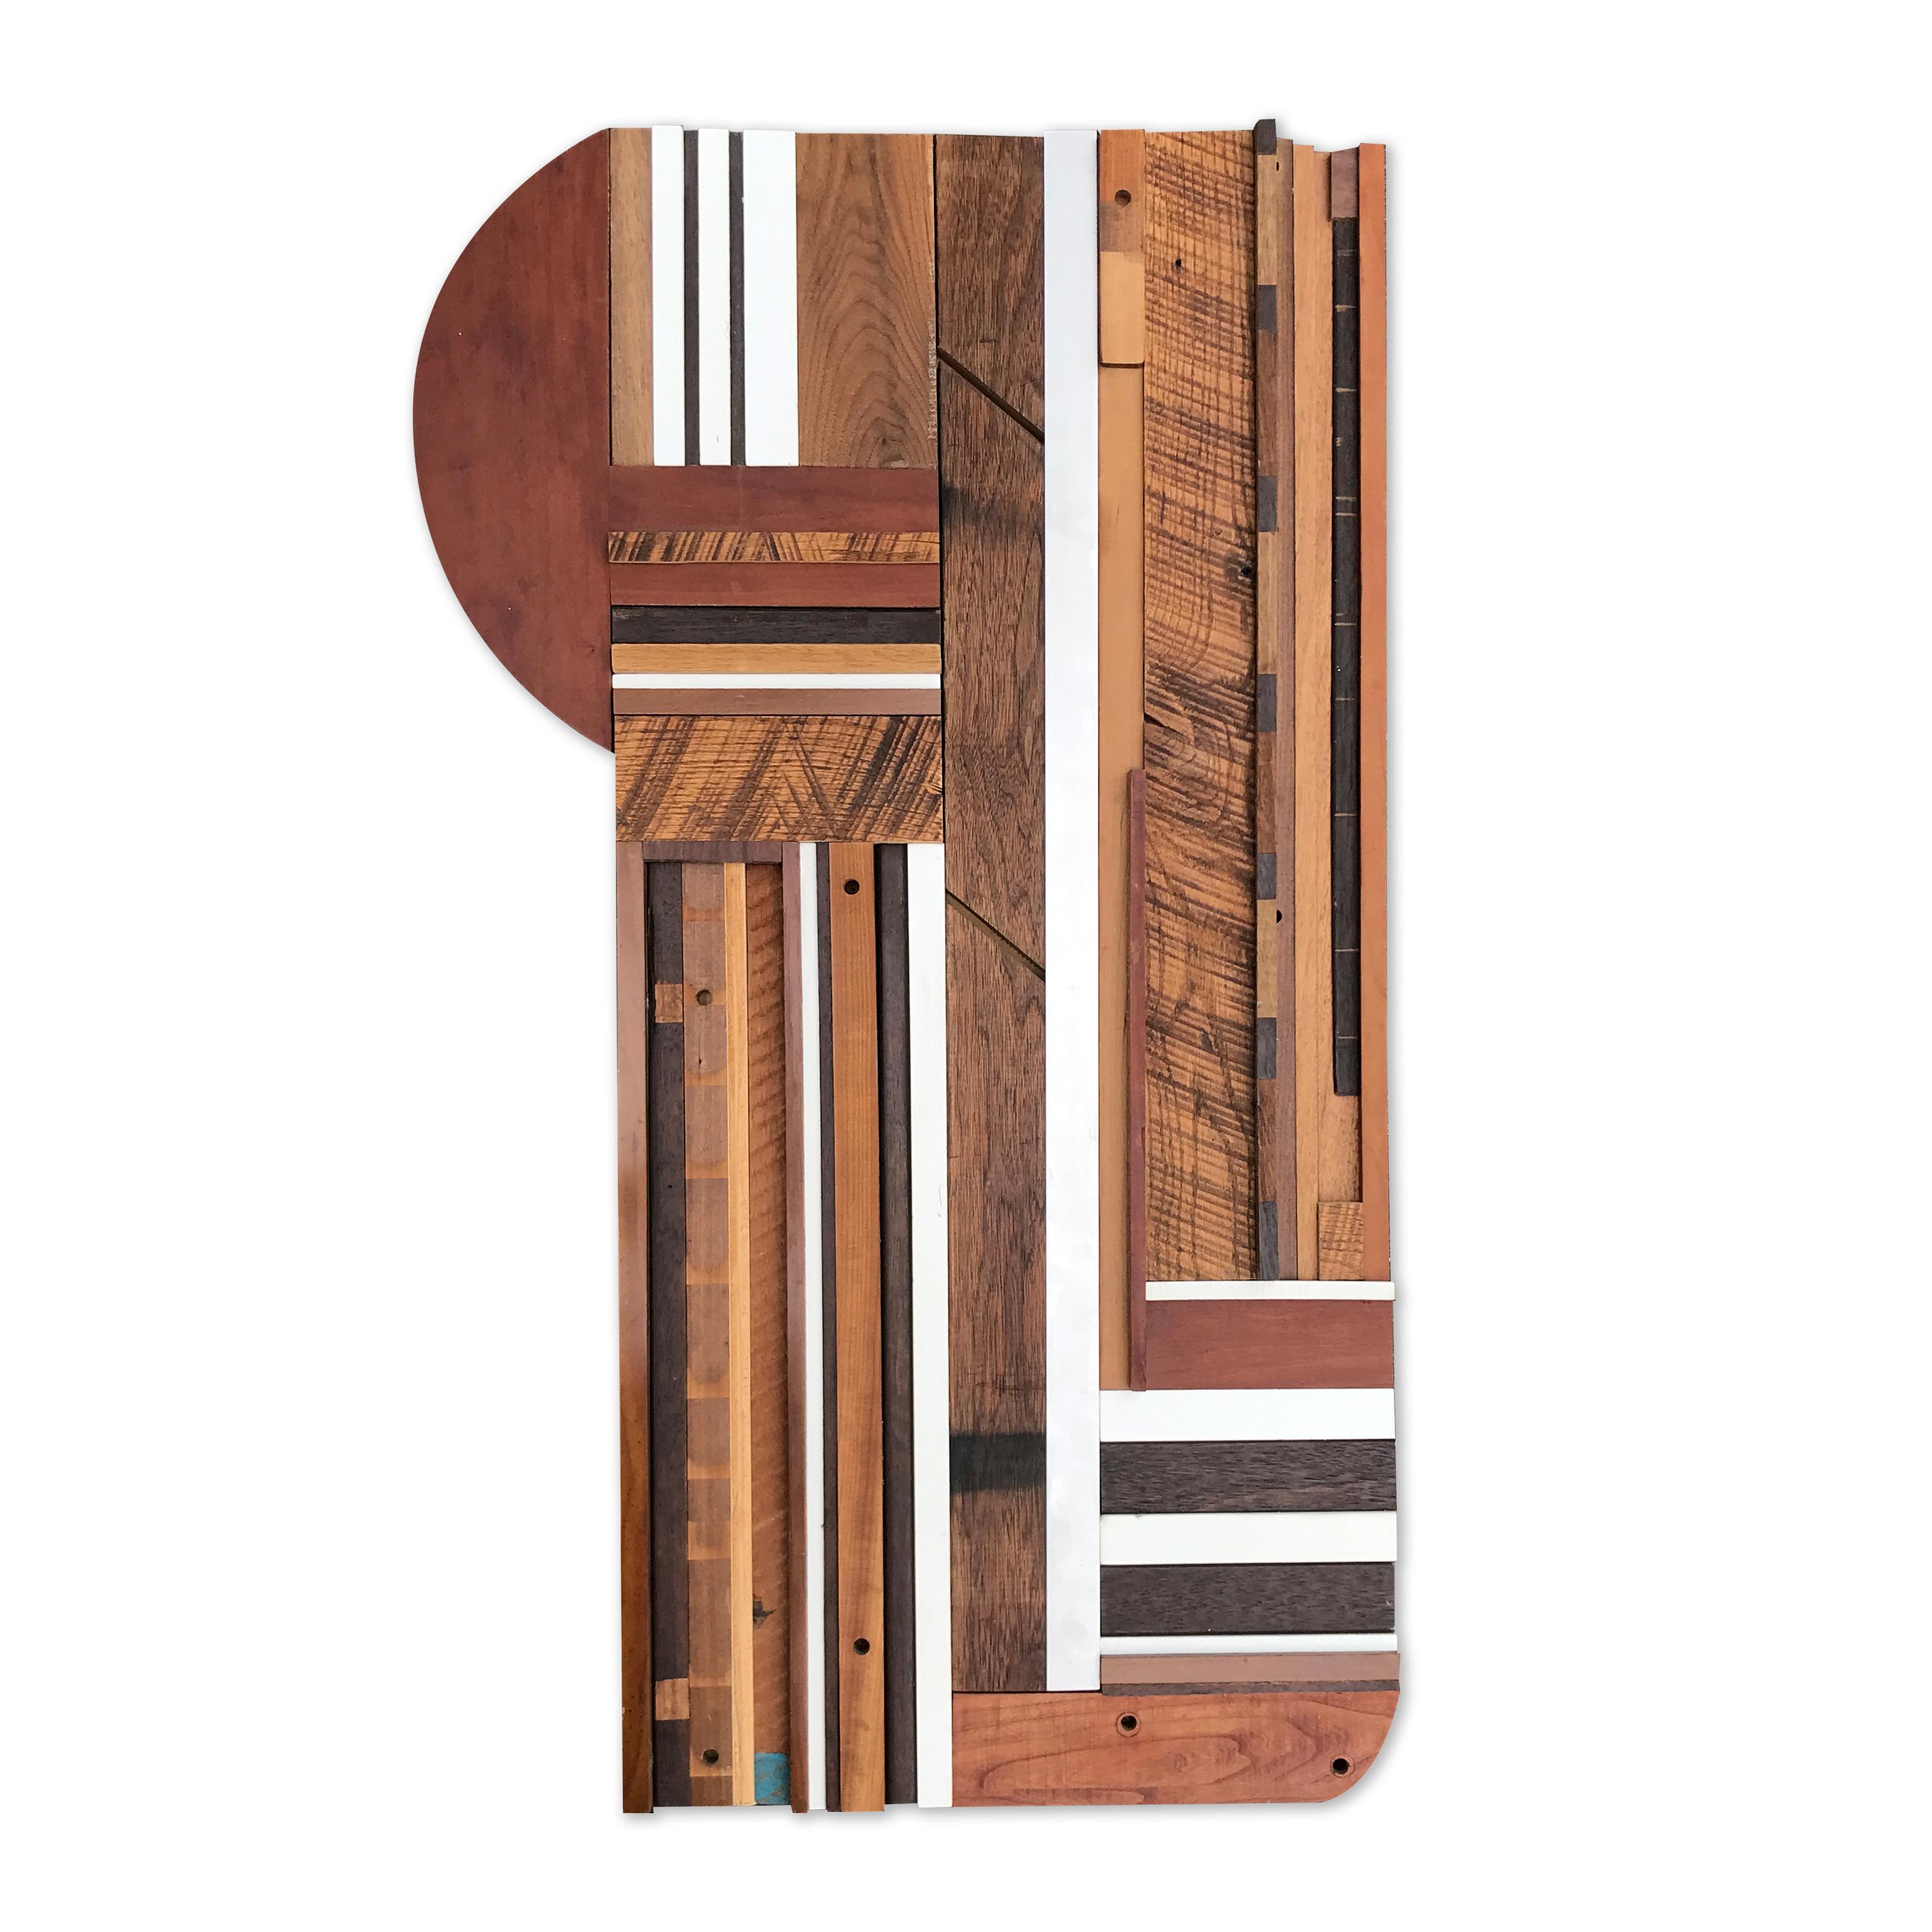 Scott Troxel Abstract Sculpture - "Stout" Wood Wall Sculpture Modern, white, tan, brown rustic, brutalism, upcycle